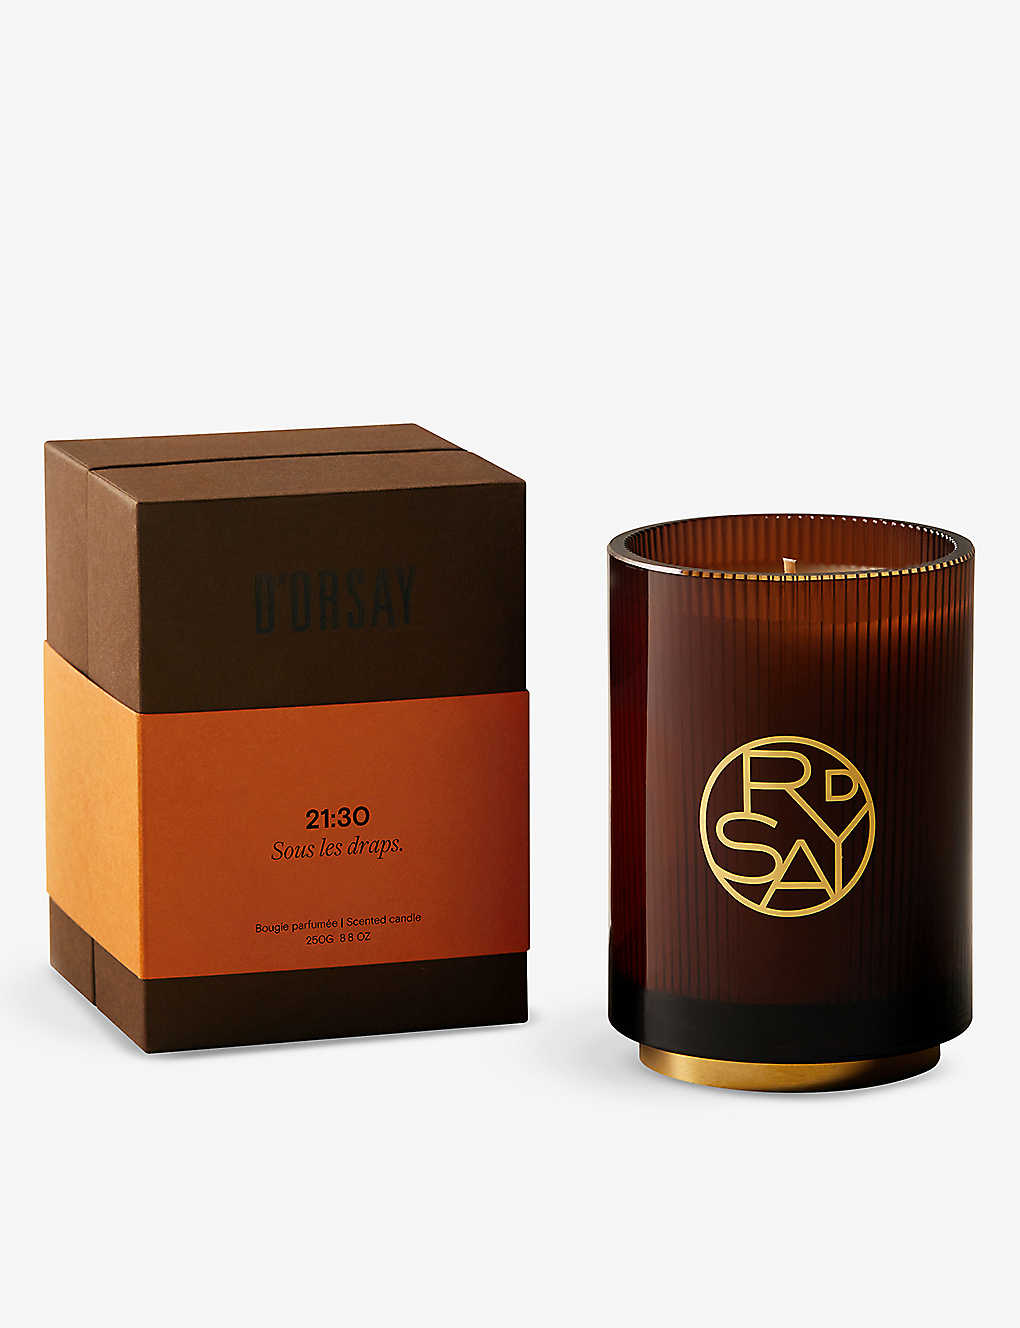 D'orsay Dorsay 21:30 Sous Les Draps Scented Candle 250g